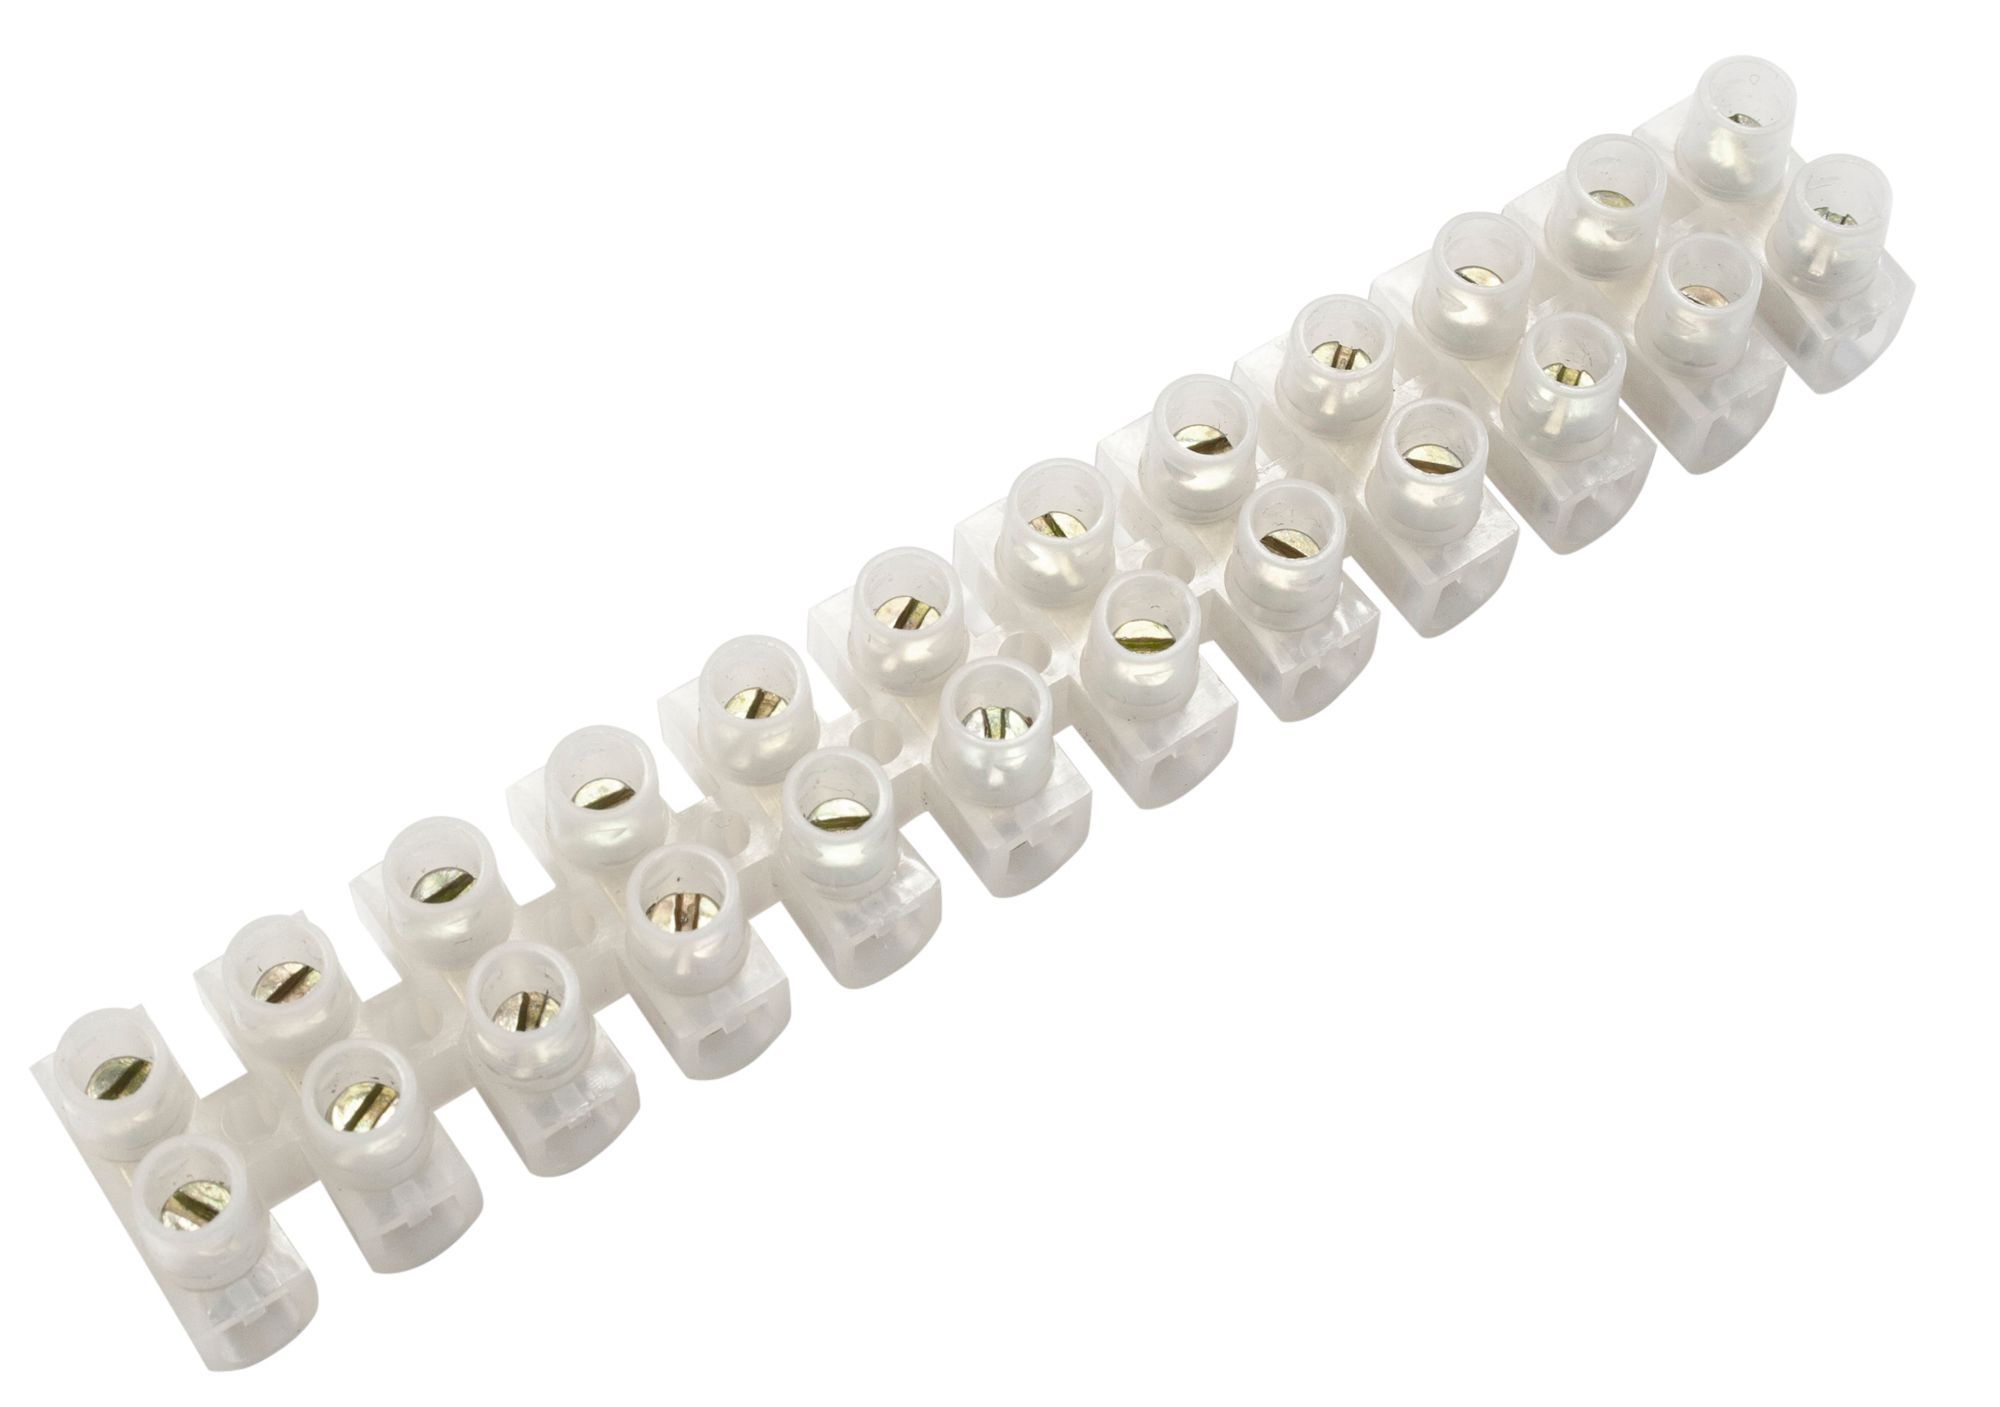 B&Q White 30A12 way Cable connector strip